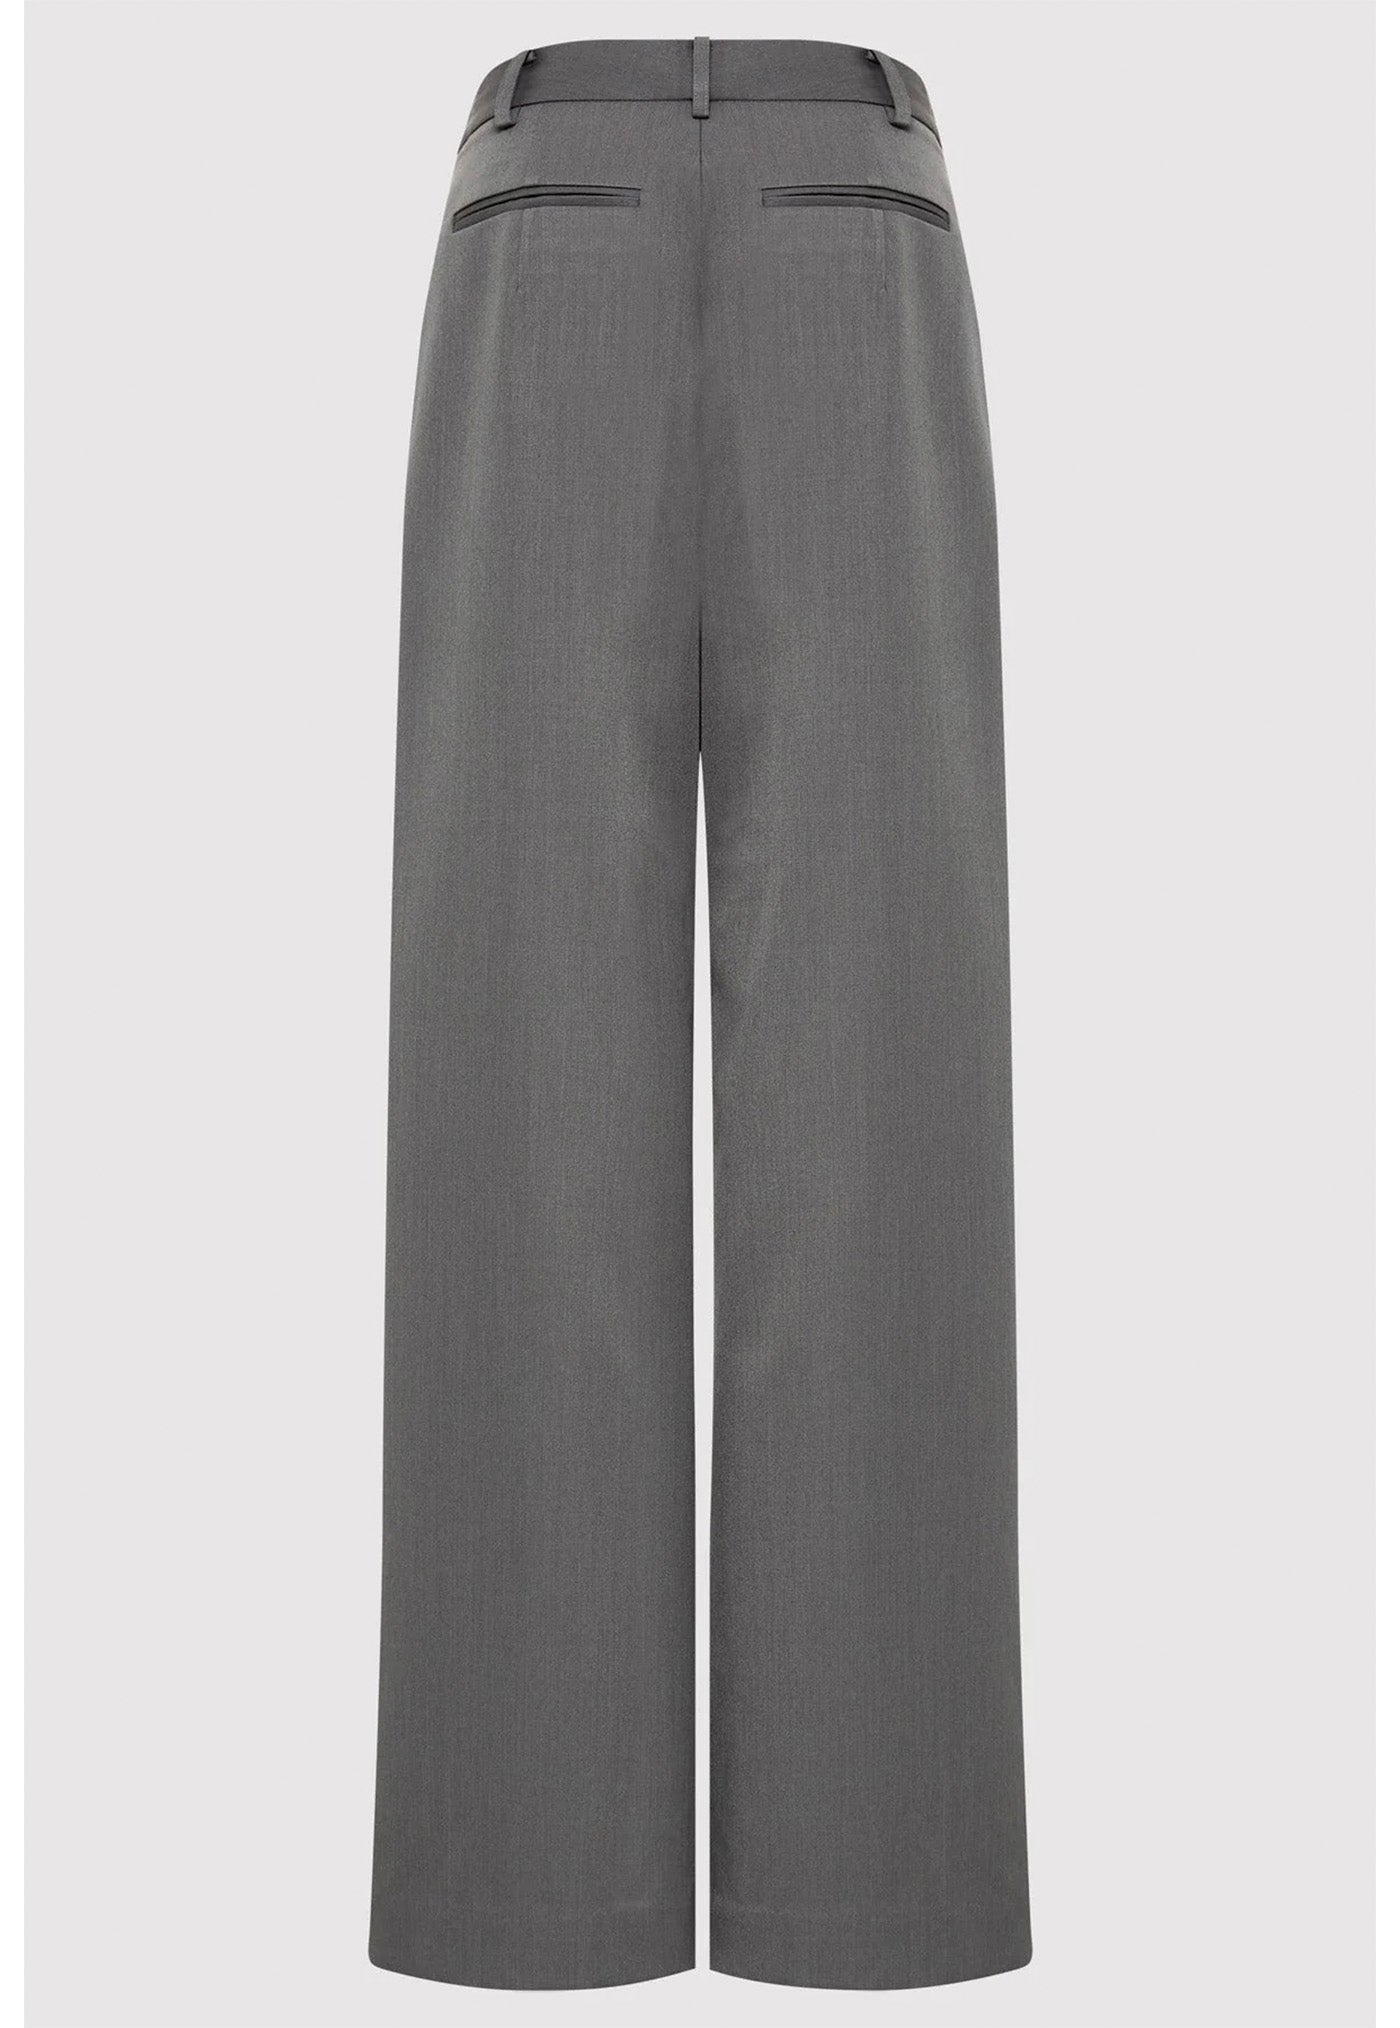 Homme Pleat Pants - Pewter Grey sold by Angel Divine